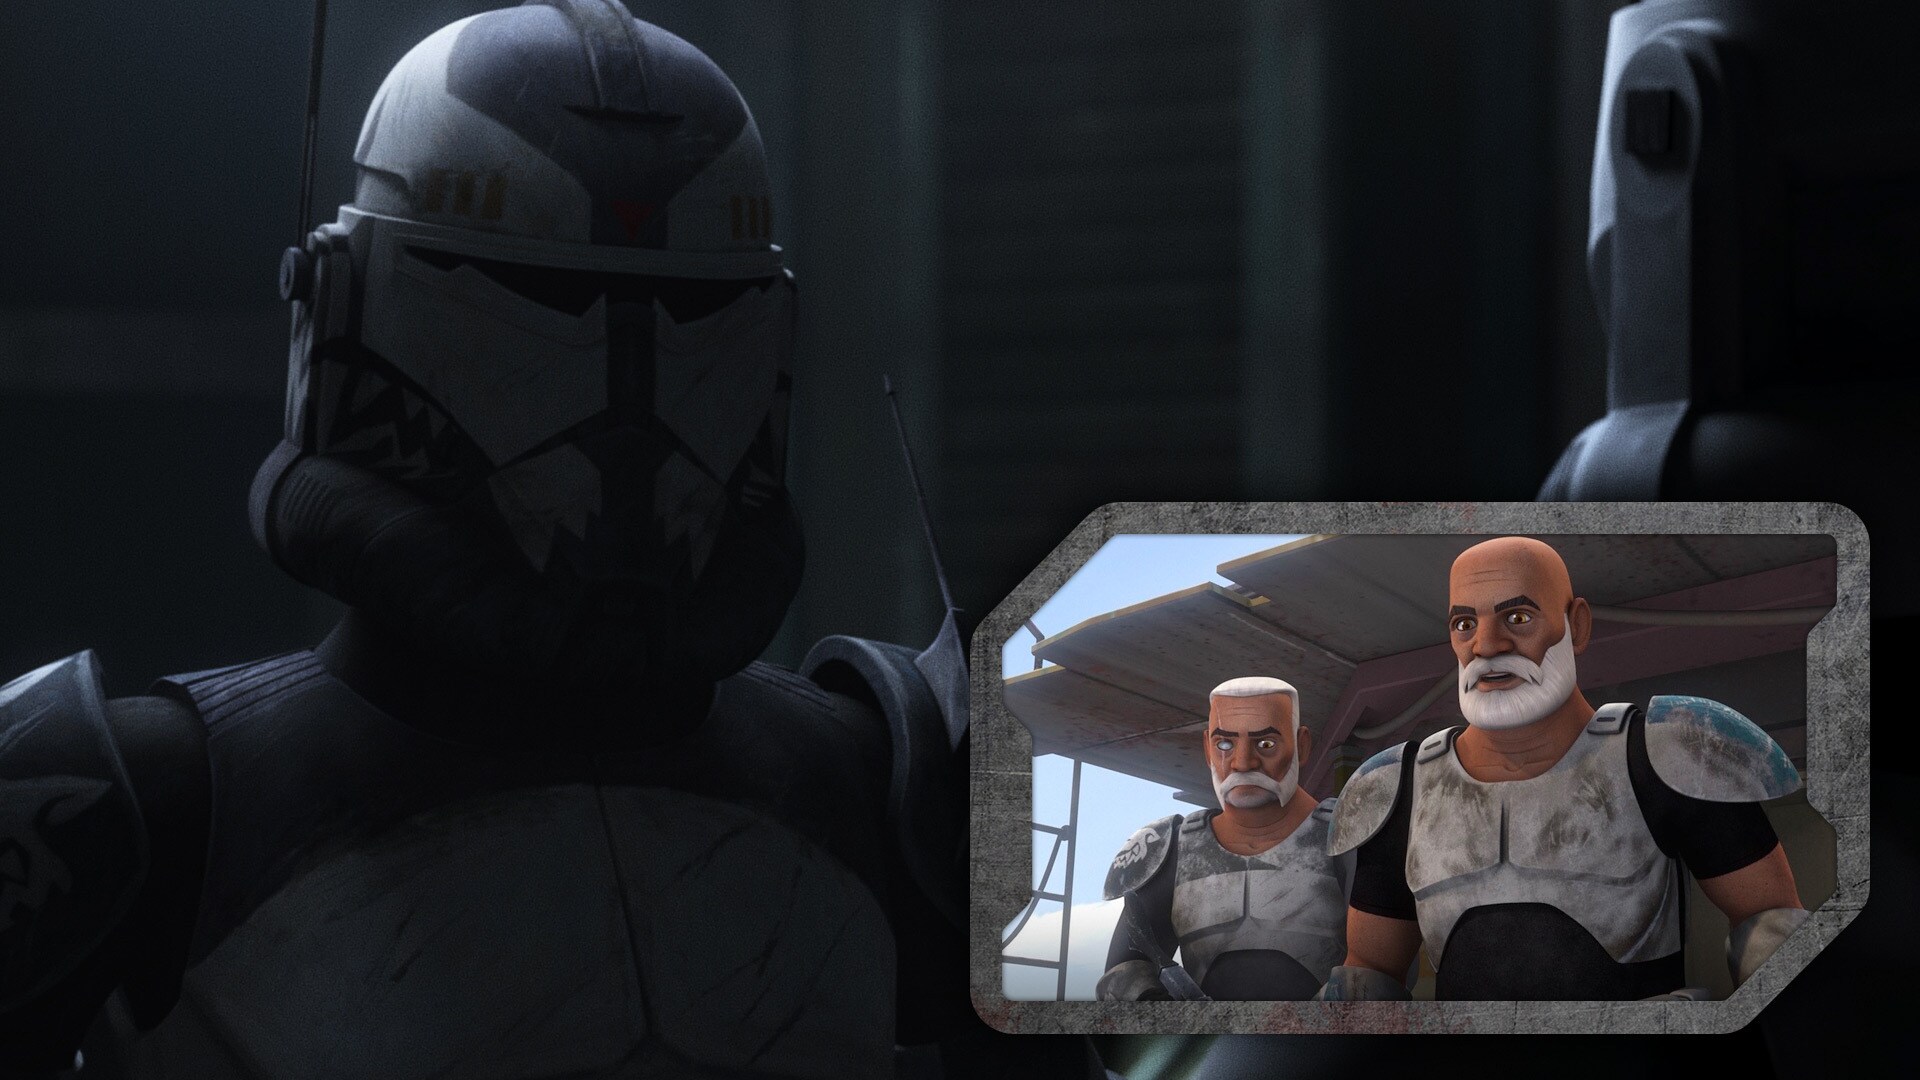 Commander Wolffe makes an appearance at the end of the episode as a still-loyal Imperial trooper....